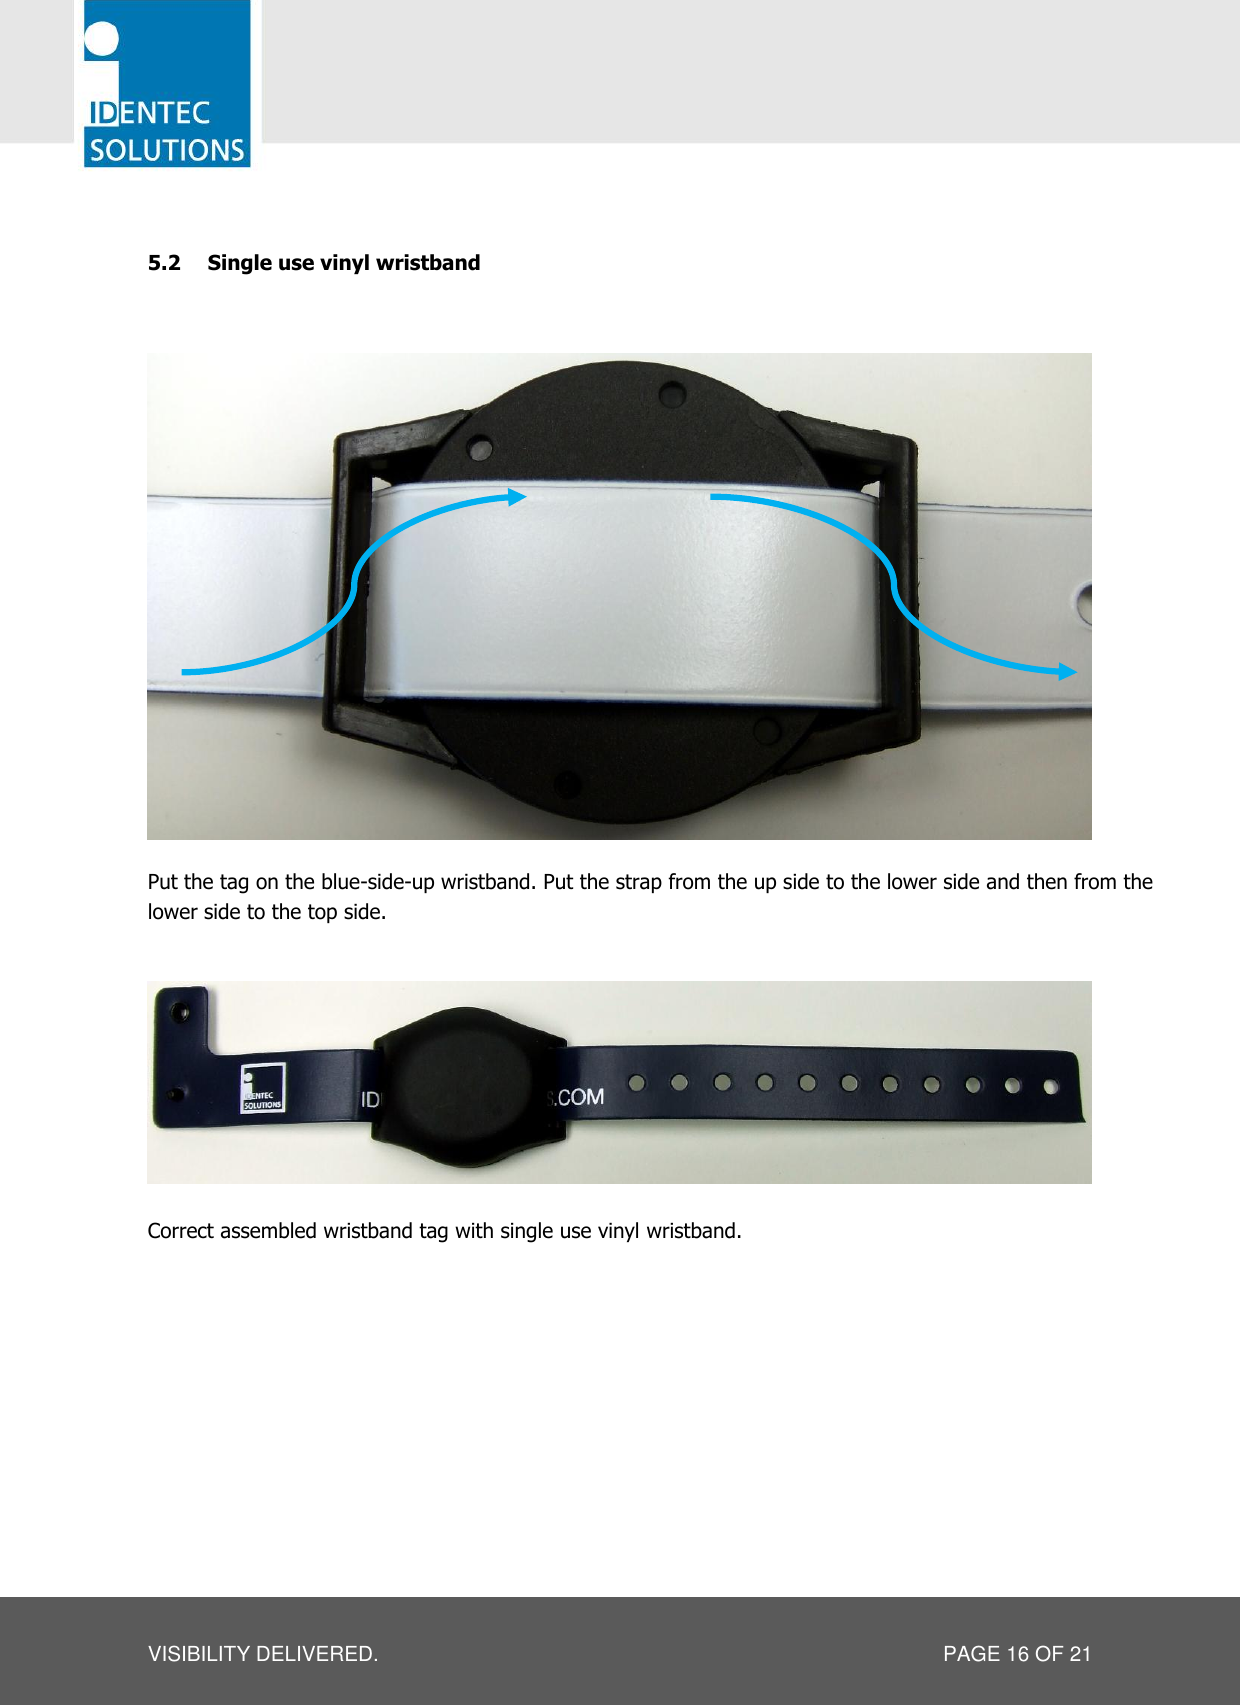   VISIBILITY DELIVERED.  PAGE 16 OF 21  5.2 Single use vinyl wristband   Put the tag on the blue-side-up wristband. Put the strap from the up side to the lower side and then from the lower side to the top side.      Correct assembled wristband tag with single use vinyl wristband.    